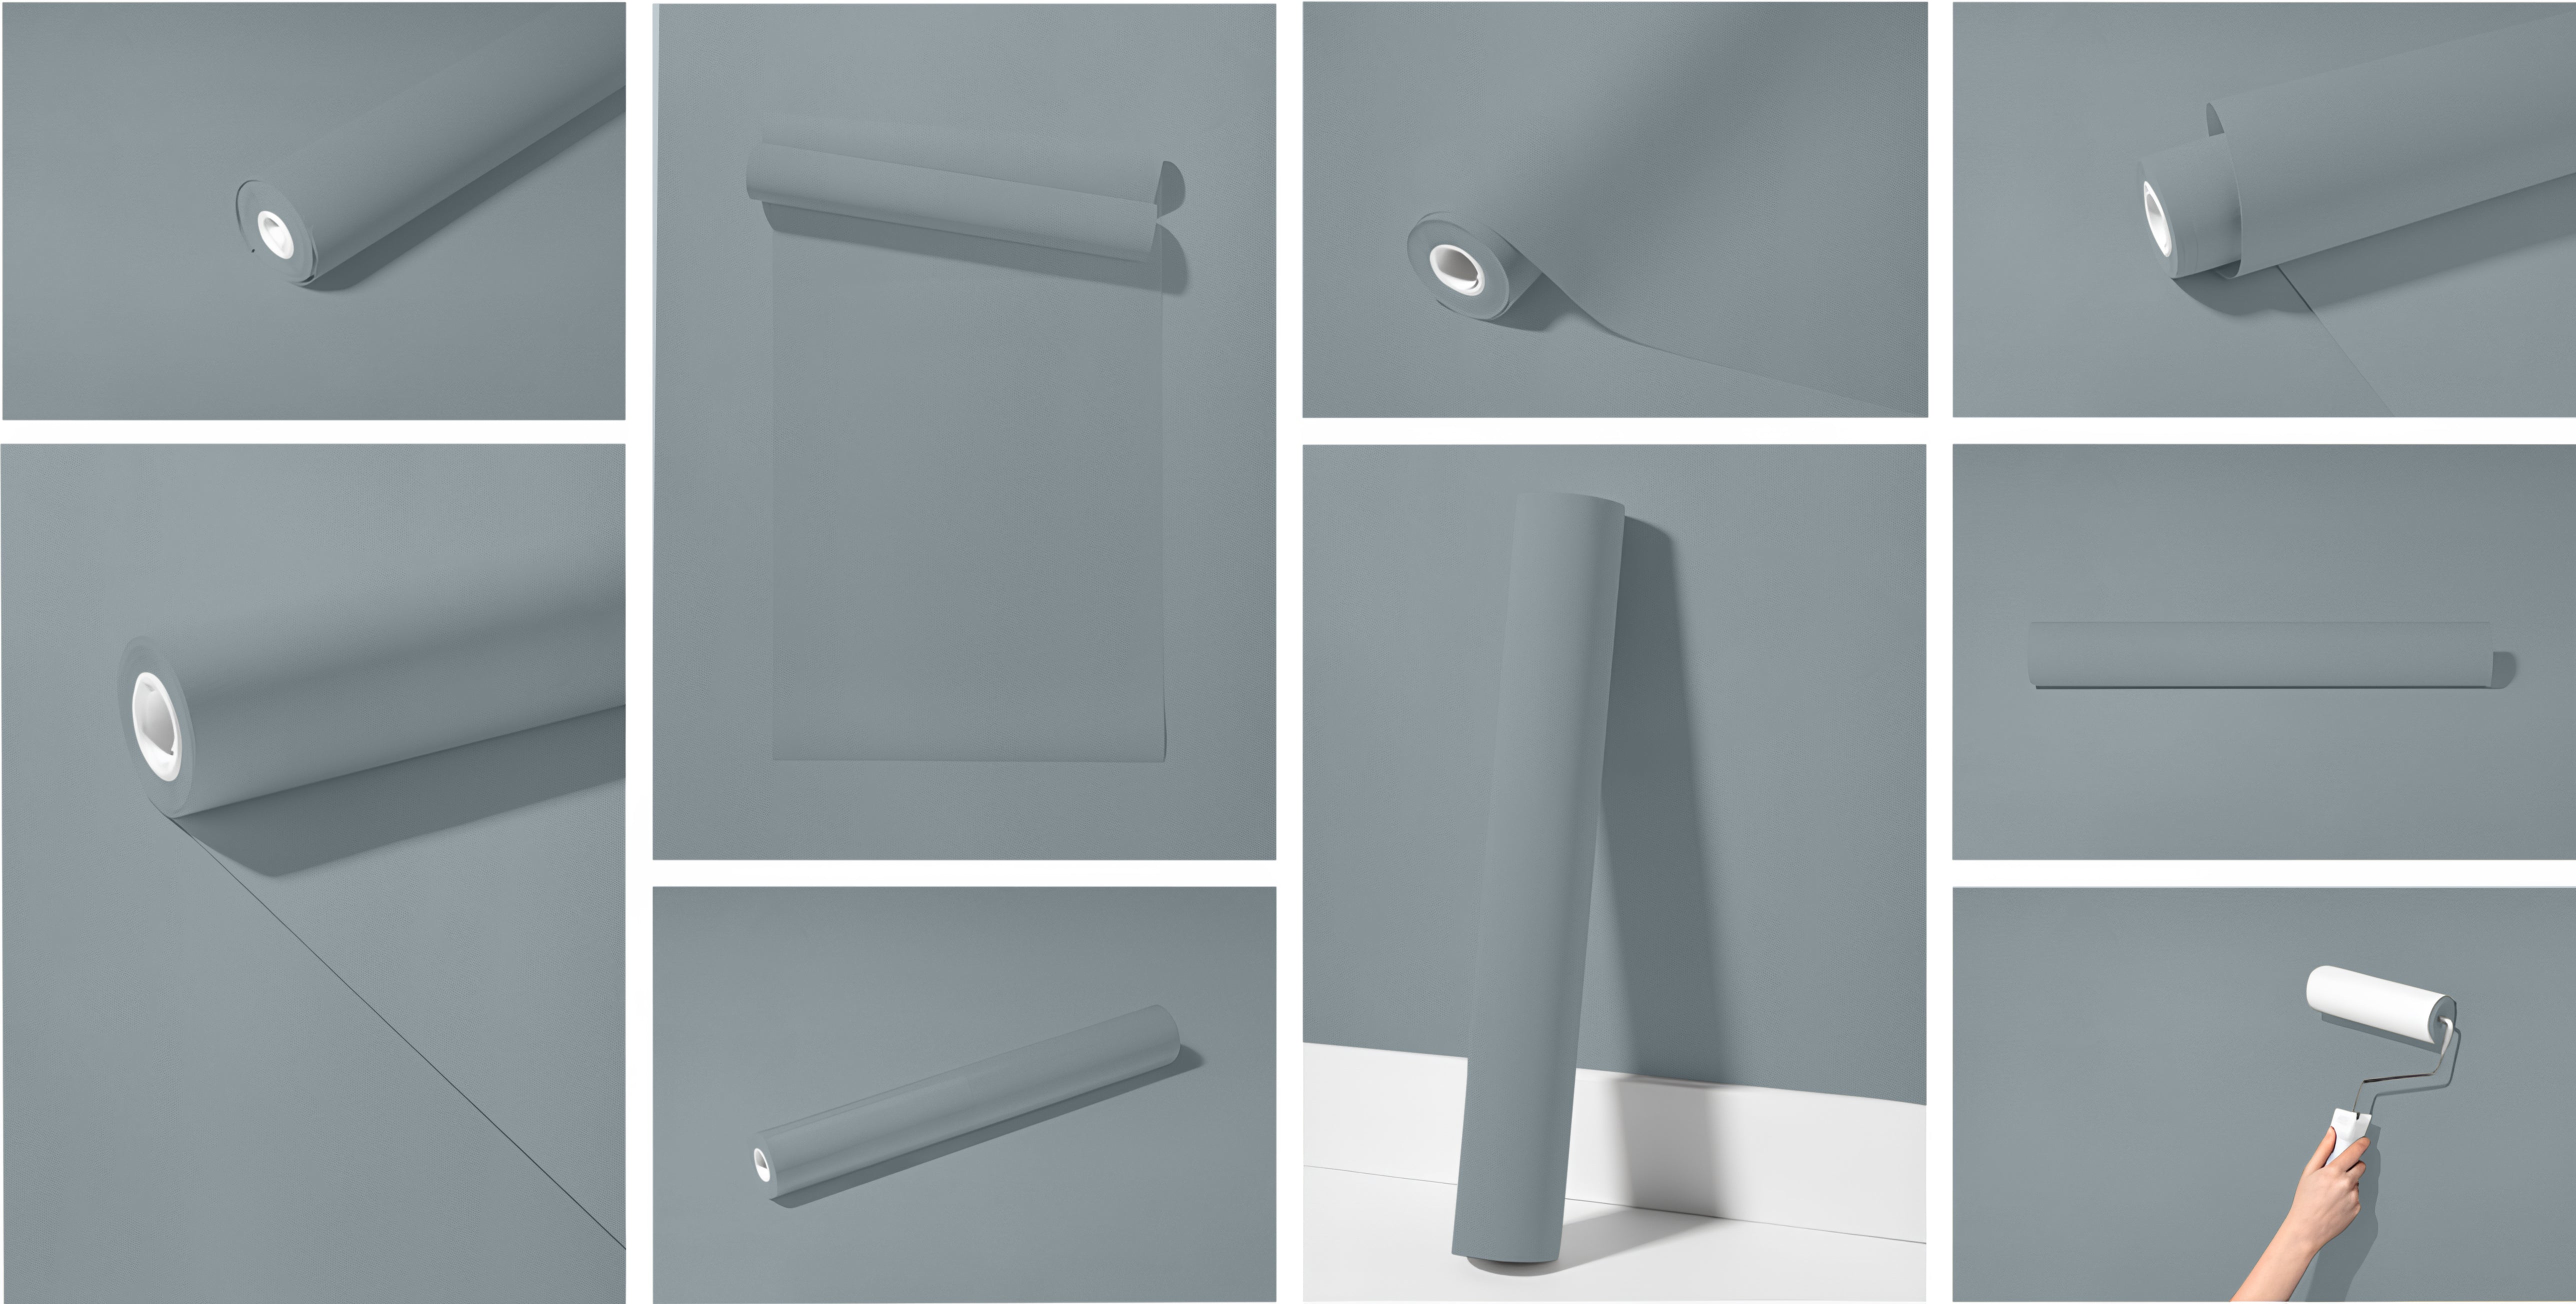 Peel & Stick Removable Re-usable Paint - Color RAL 7001 Silver Grey - offRAL™ - RALRAW LLC, USA